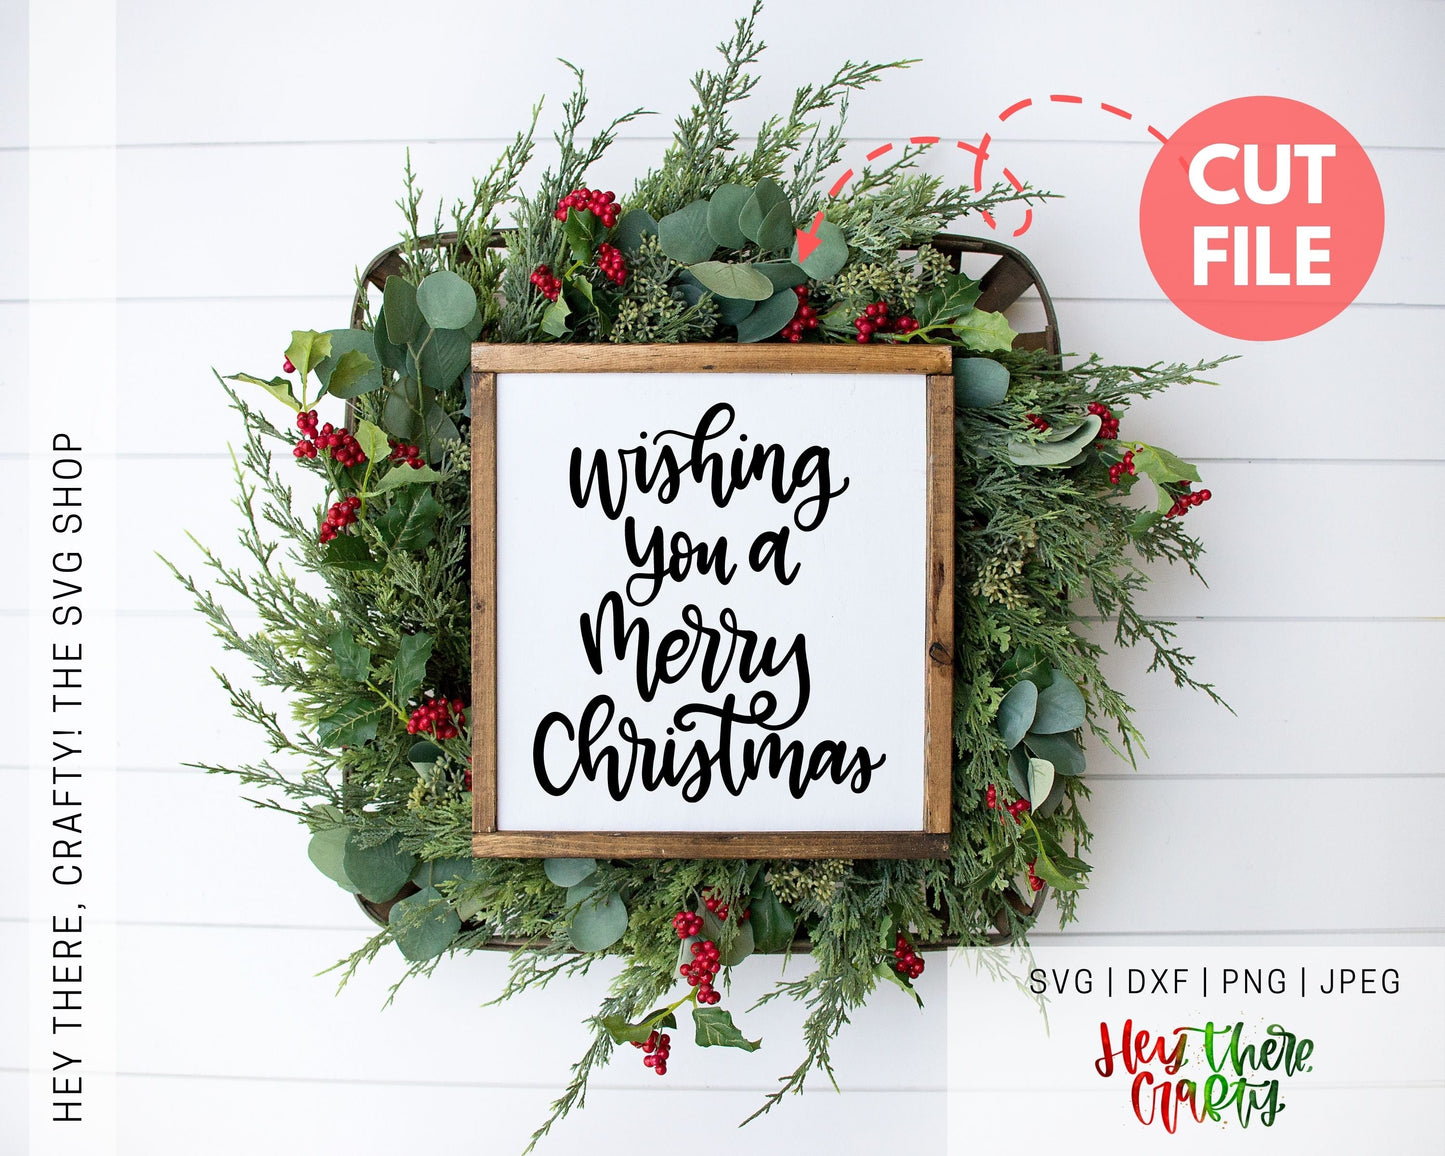 Wishing You a Merry Christmas | SVG, PNG, DXF, JPEG